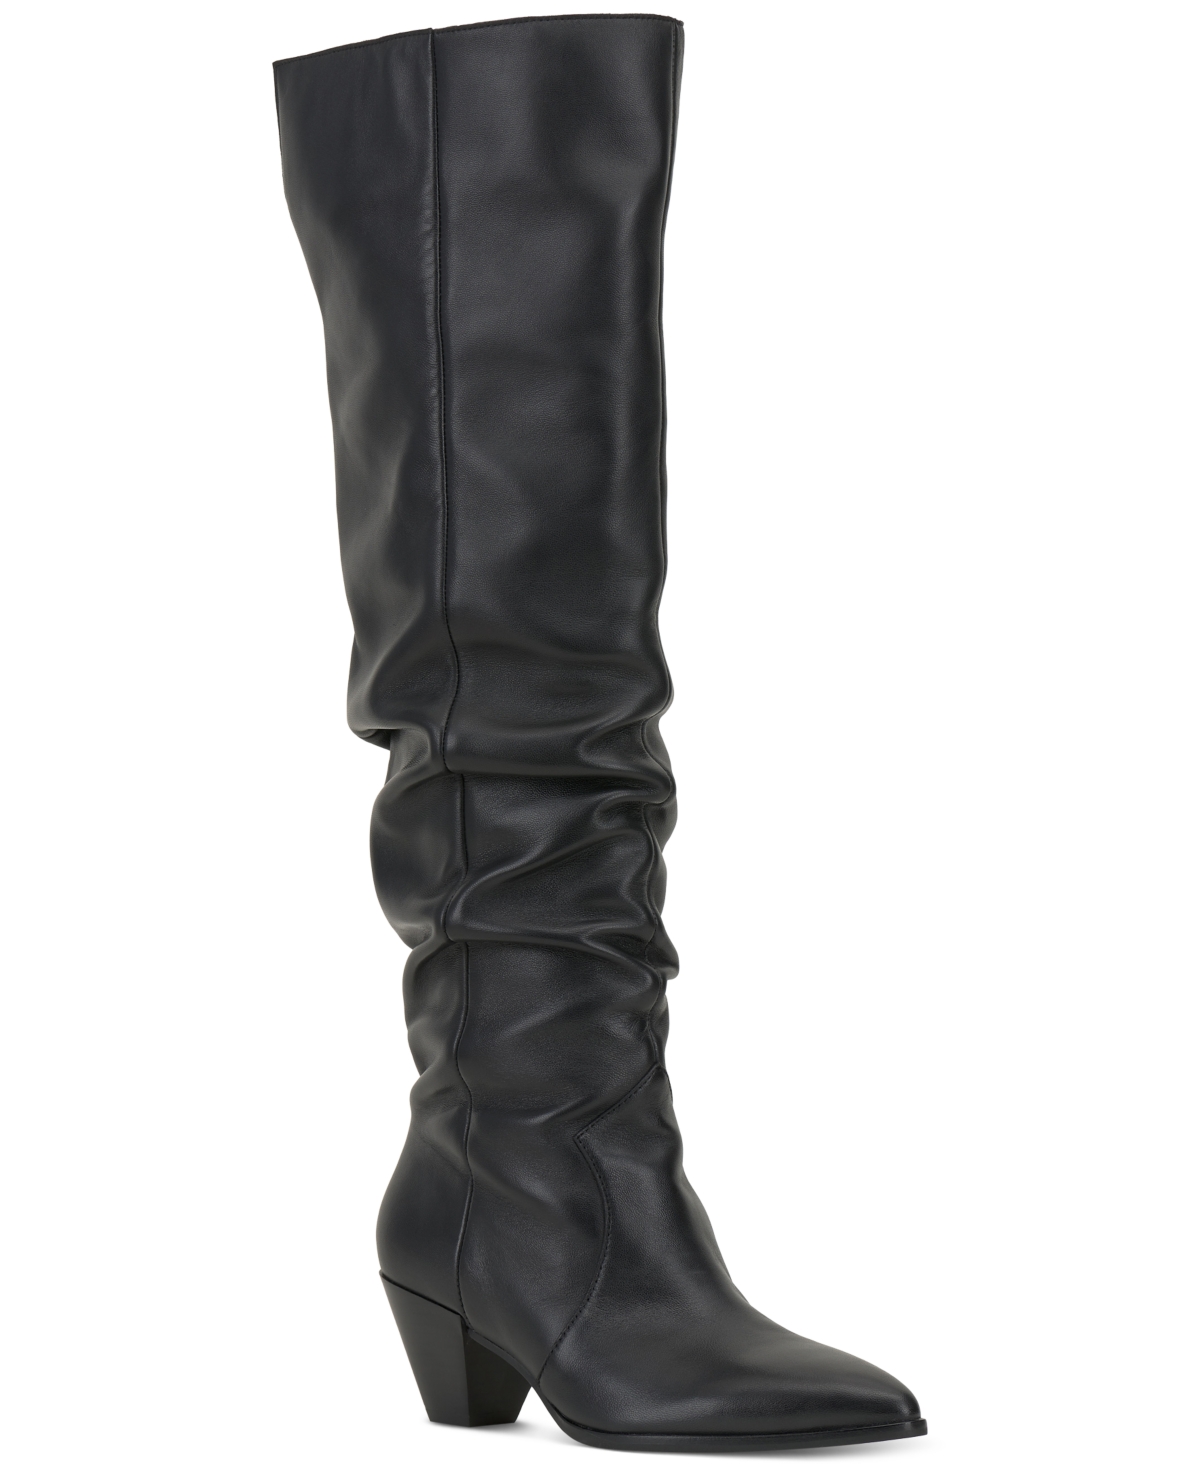 VINCE CAMUTO WOMEN'S SEWINNY EXTRA WIDE-CALF SLOUCH KNEE-HIGH DRESS BOOTS